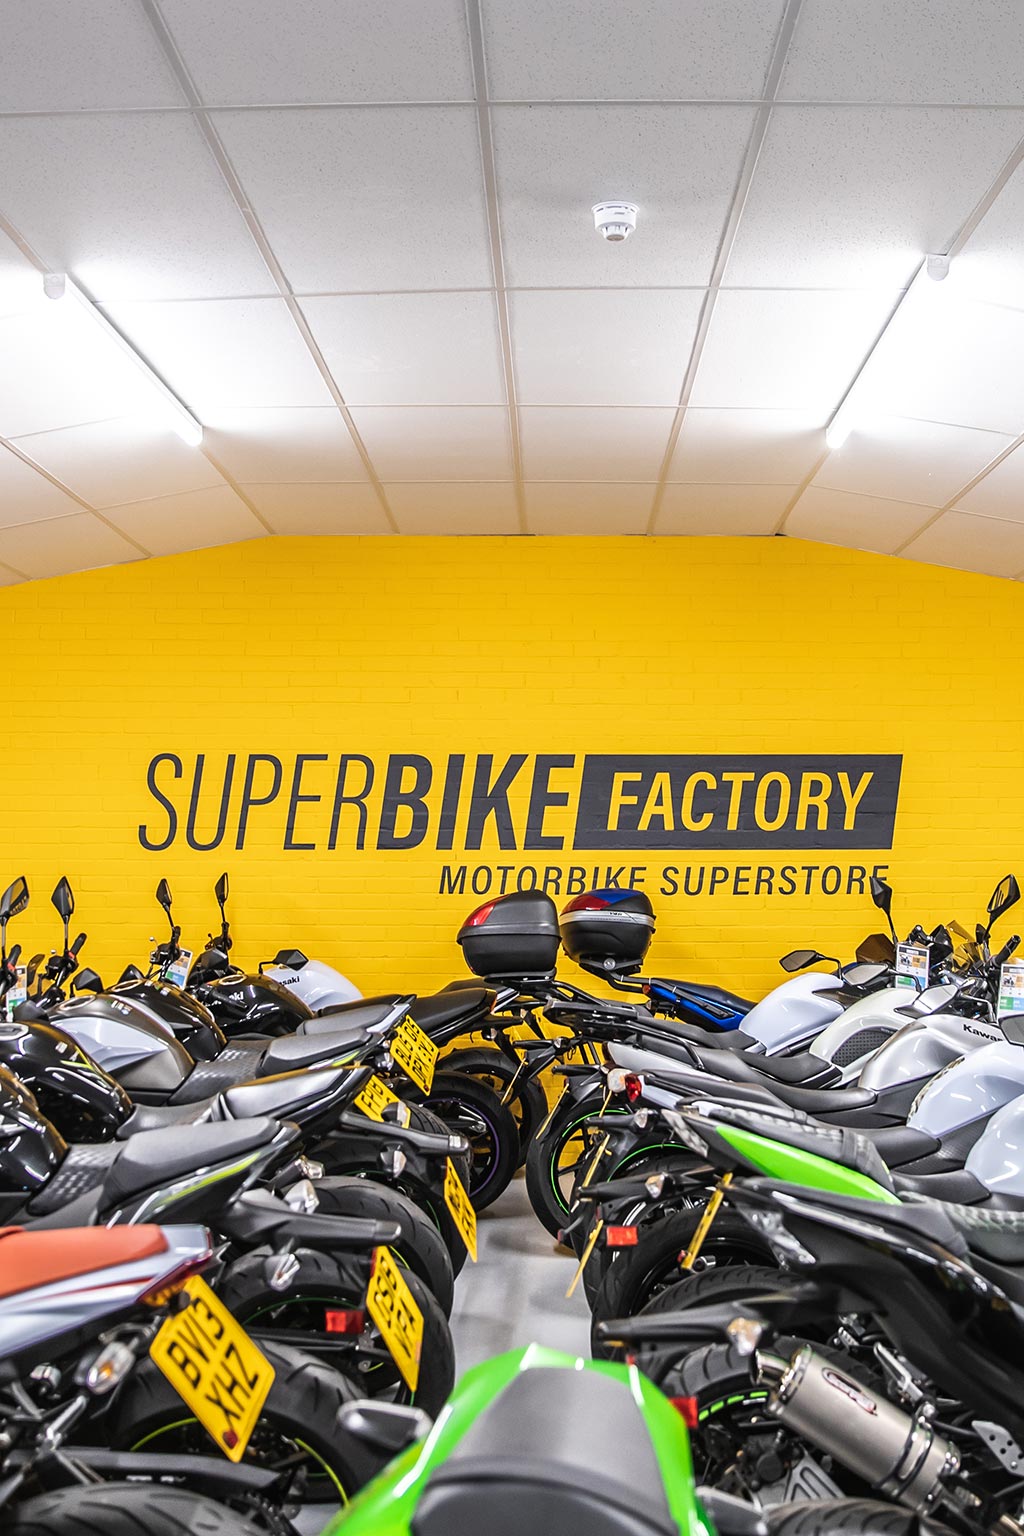 The Superbike Factory Case Study